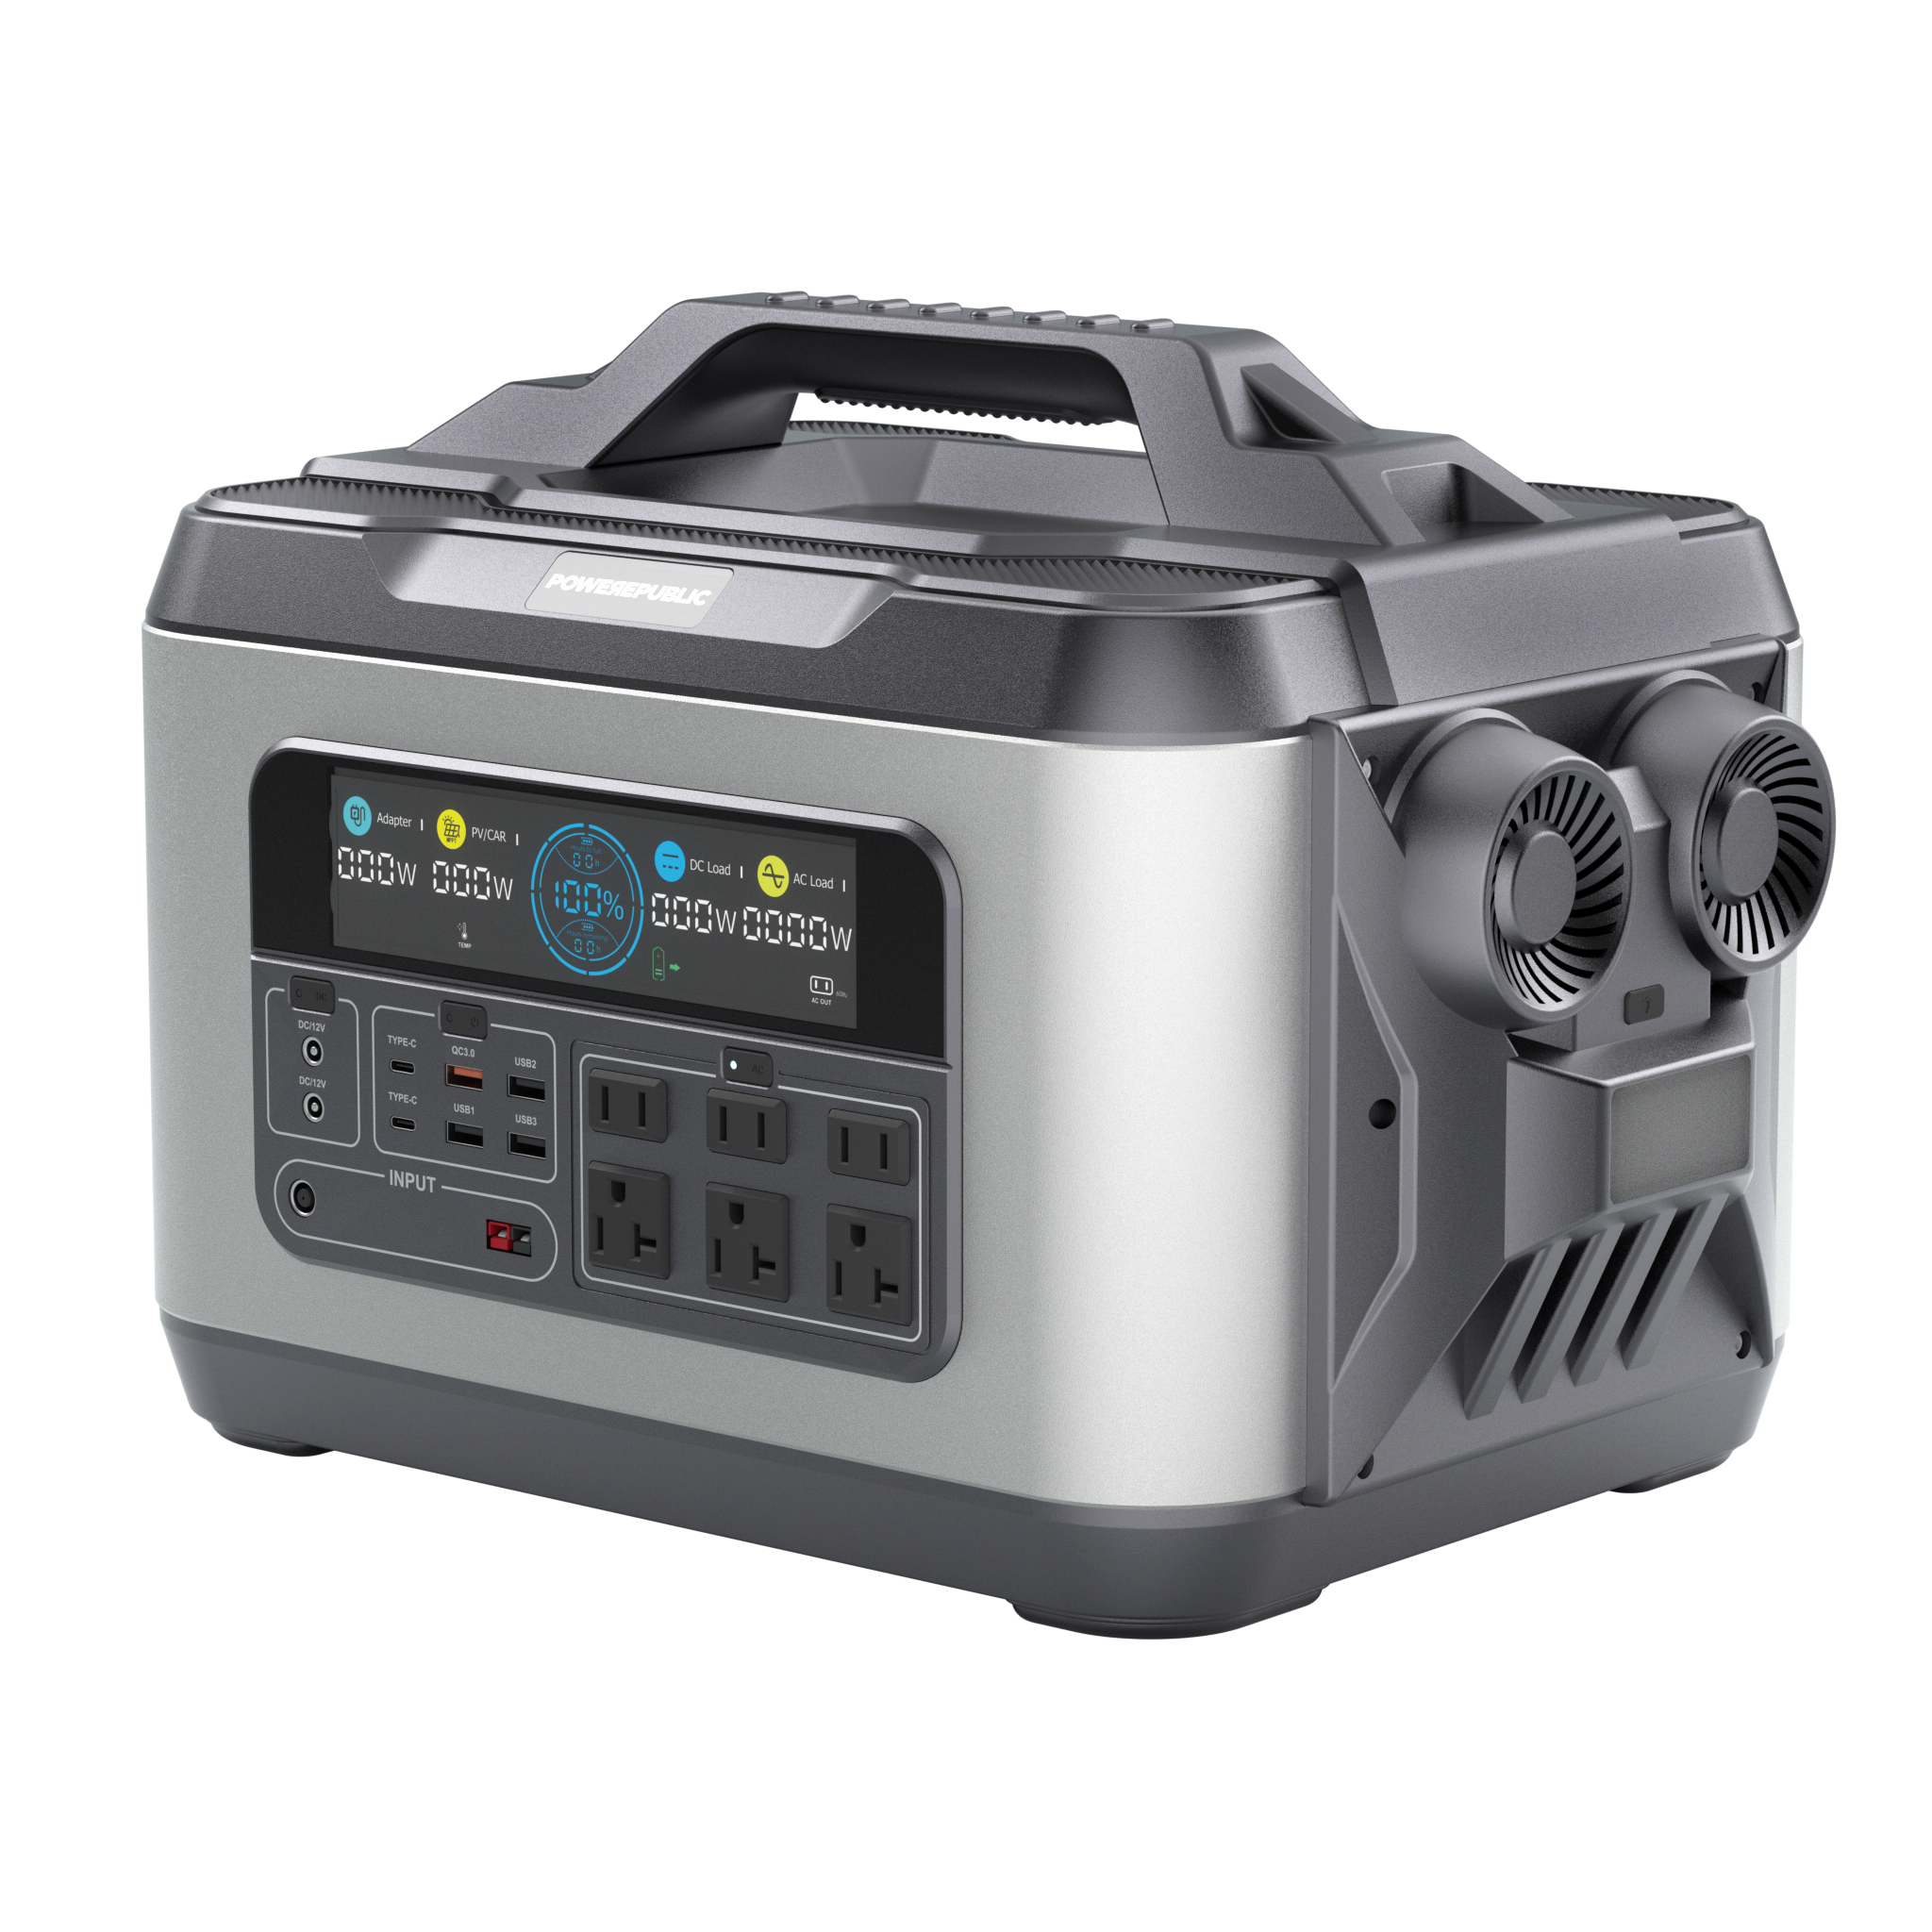 POWEREPUBLIC T2200 portable power station, 2200W 2240Wh, metallic gray aluminum-alloy body with turbine-engine design, an LED Light, a handle, an LCD screen, and input and output ports.